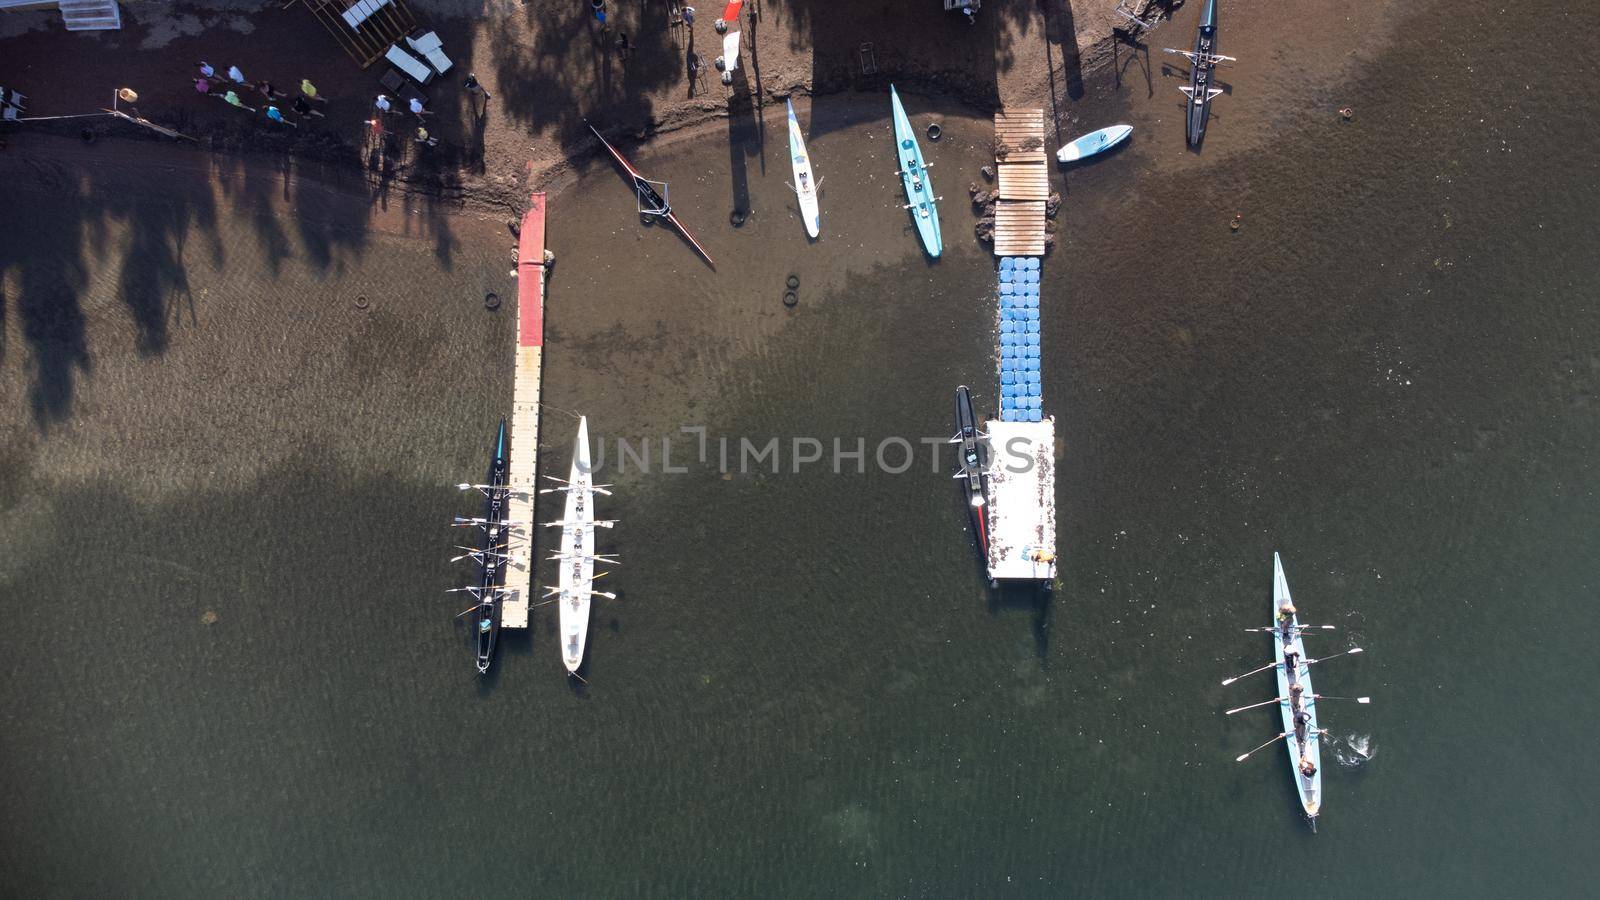 rowing team paddles on the tranquil sea. High quality photo